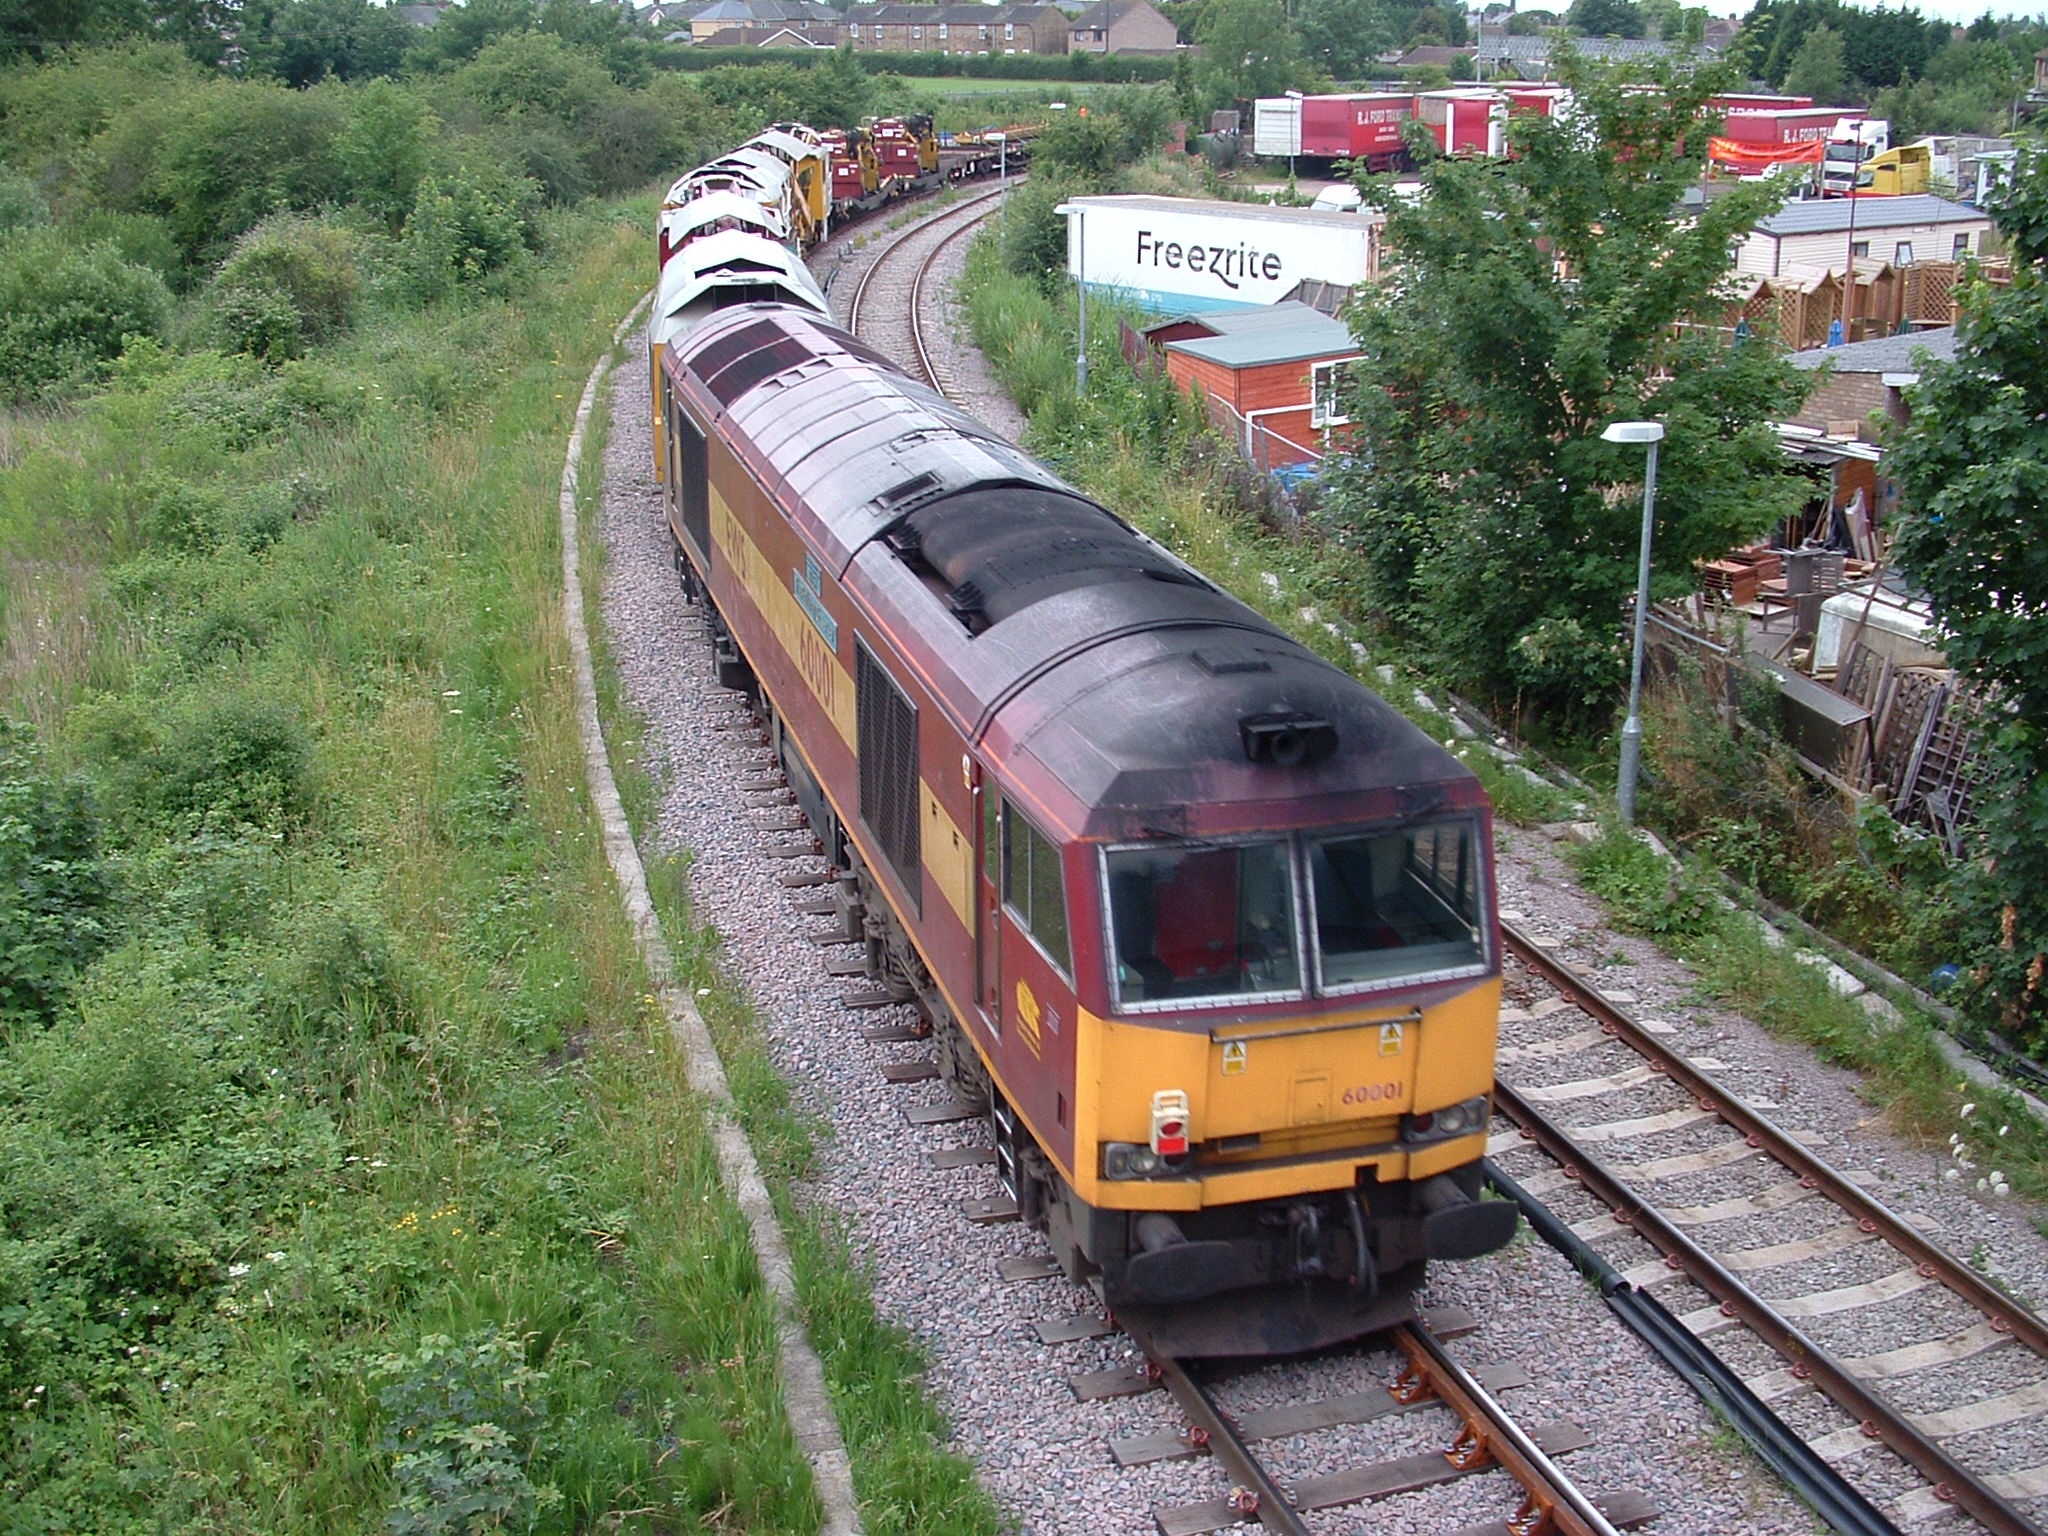 60001 at the rear of 8G01 engineers’ train, 2nd July 2005. Robert Brooks
Both ends of this train have been included to show the composition of the train.